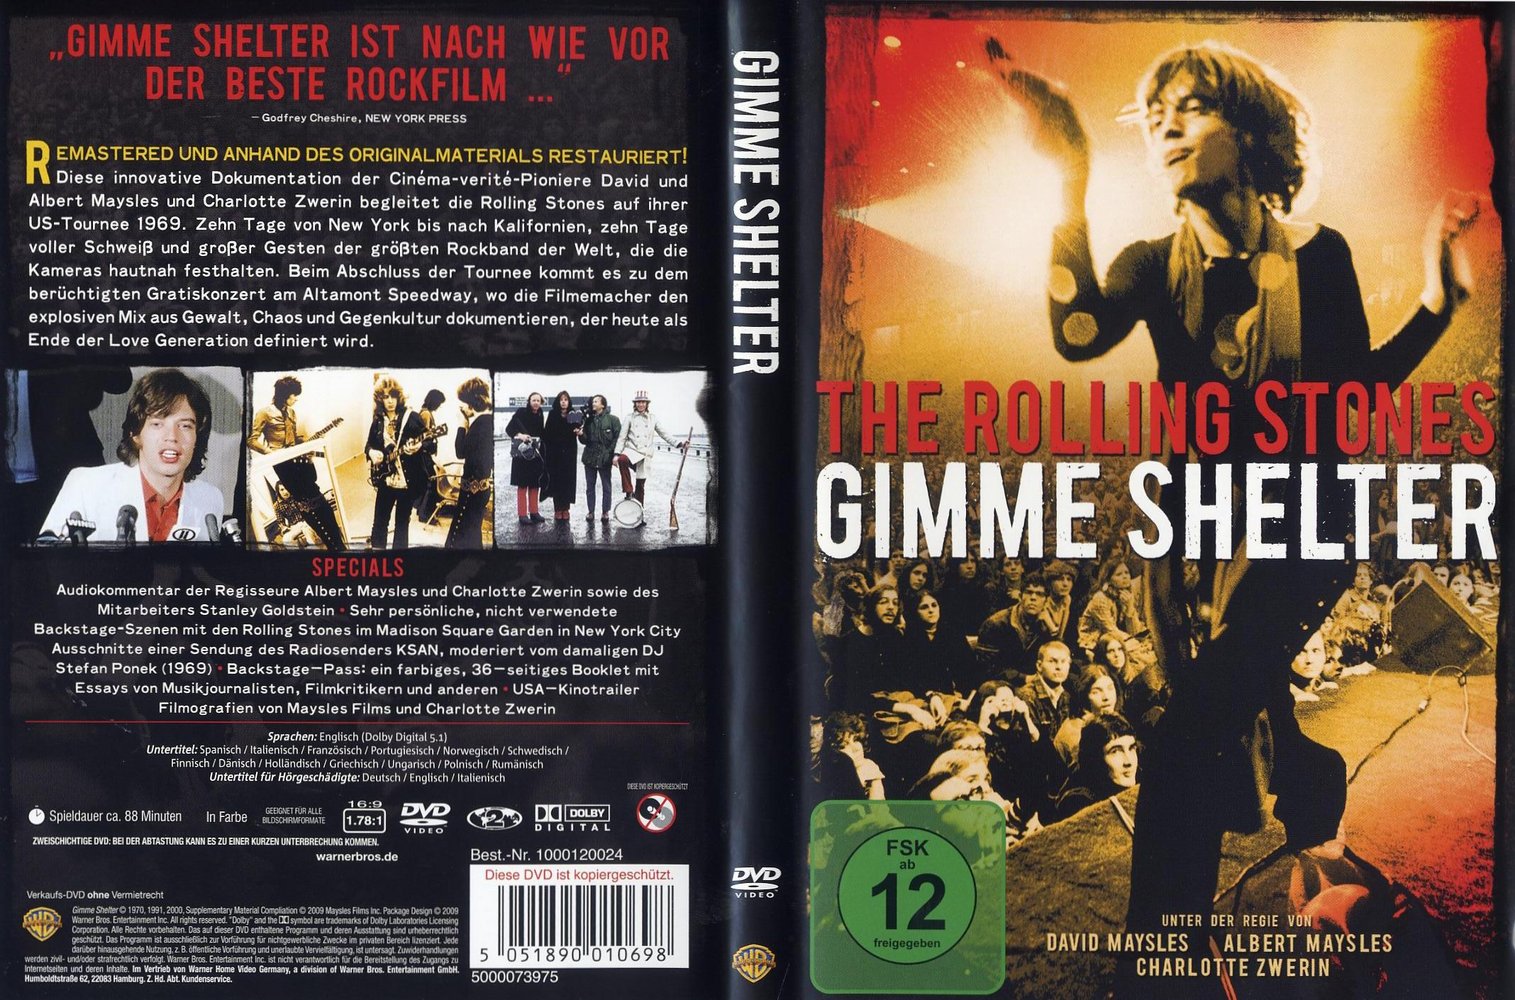 Stones gimme shelter. Rolling Stones "Gimme Shelter". The Rolling Stones DVD. Gimme Shelter 1970. Обложка для двд Rolling Stone in Exile.